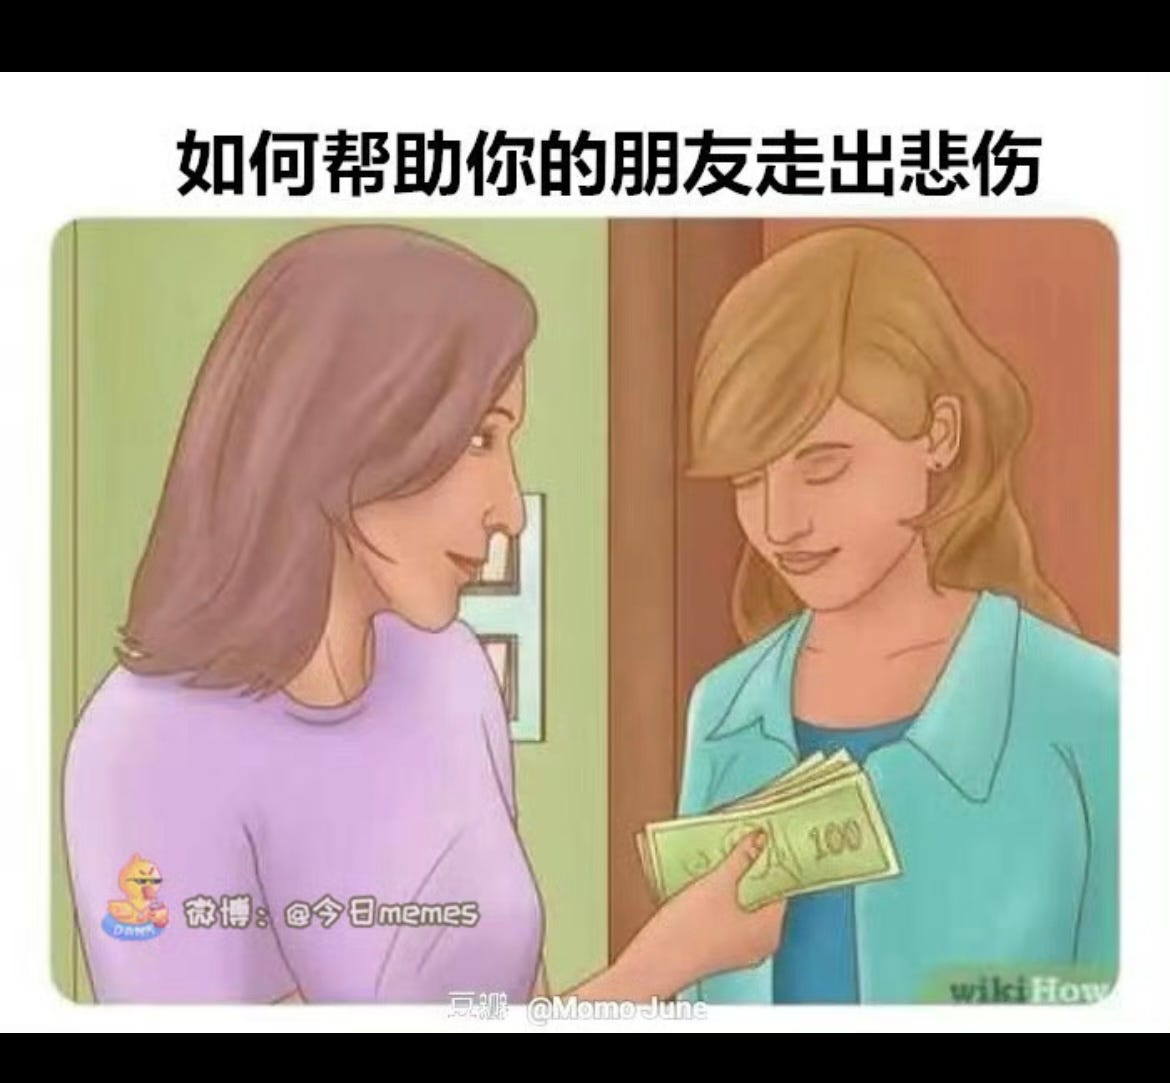 👭 A Chinese meme about friendship